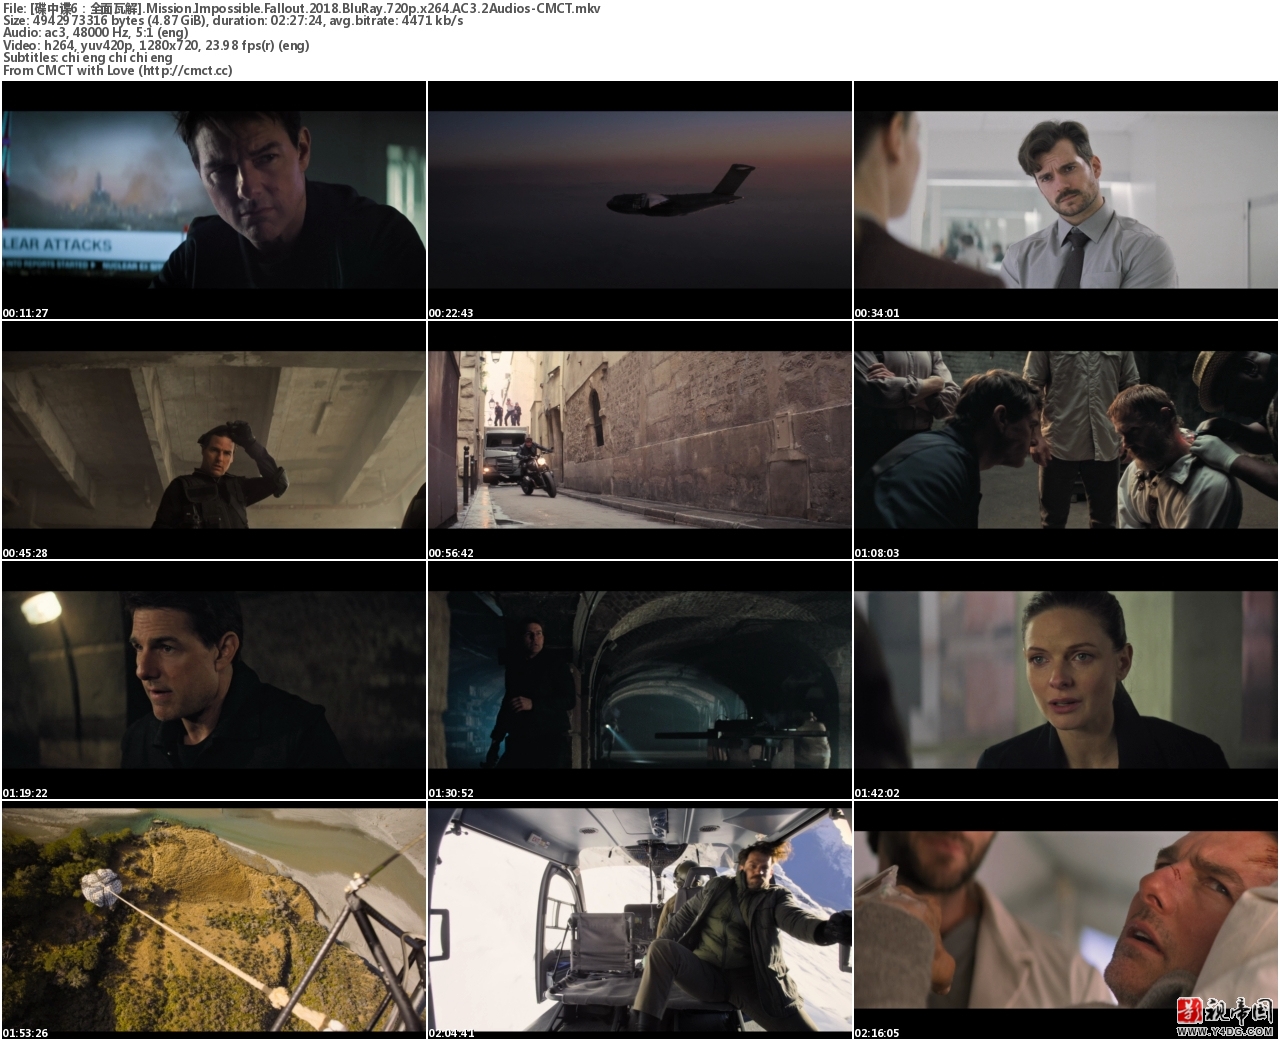 [е6ȫ߽].Mission.Impossible.Fallout.2018.BluRay.720p.x264.AC3.2Audios.jpg